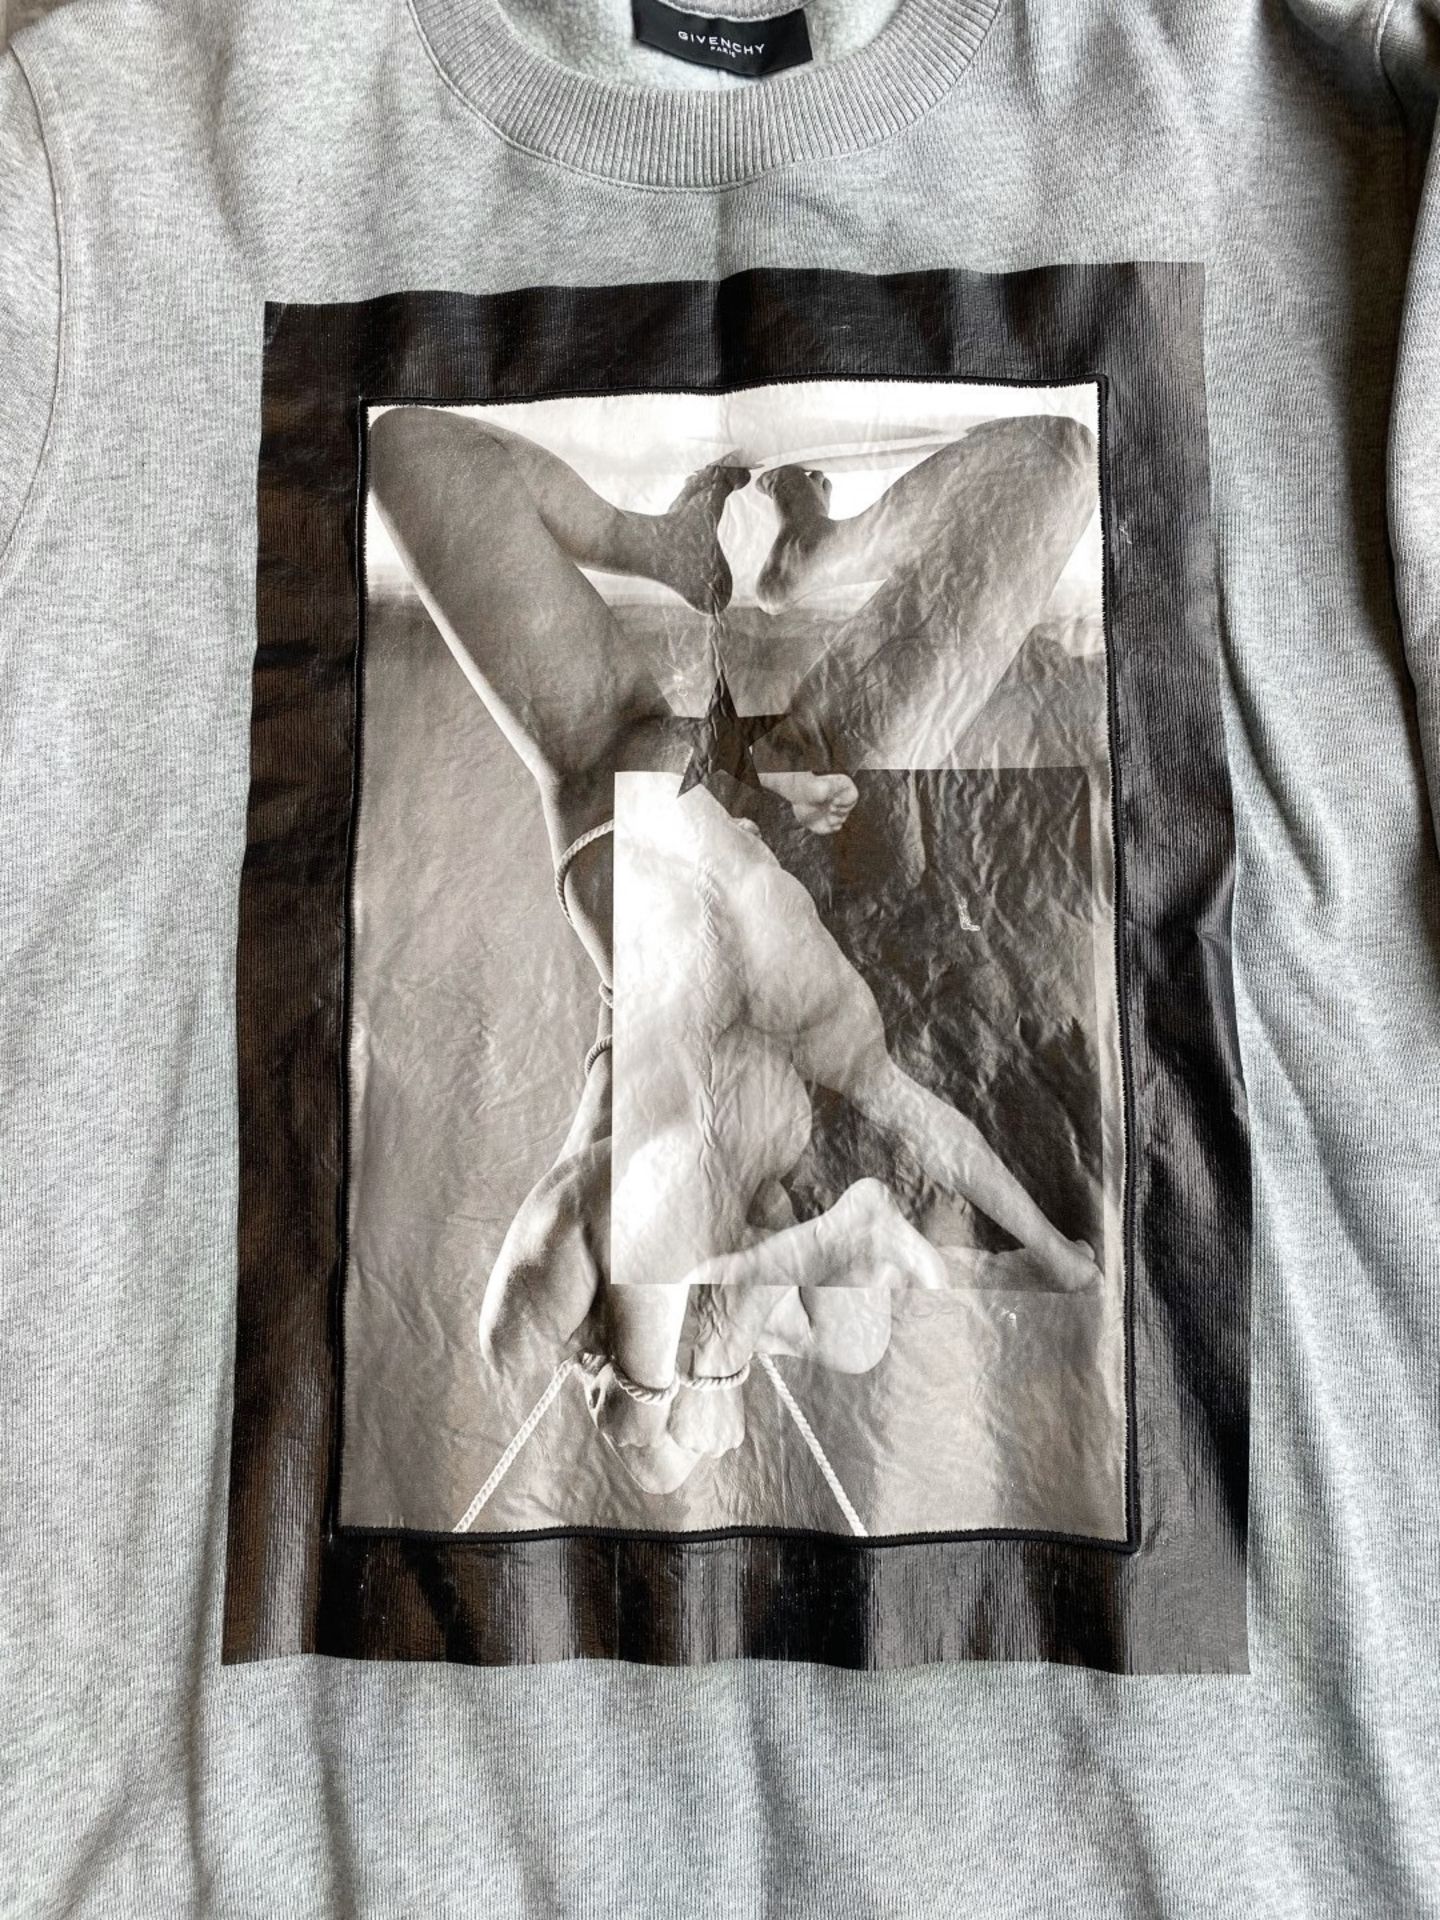 1 x Men's Genuine Givenchy Sweatshirt In Grey With Lambskin Panel On Front With Embroidered Border - Image 8 of 9